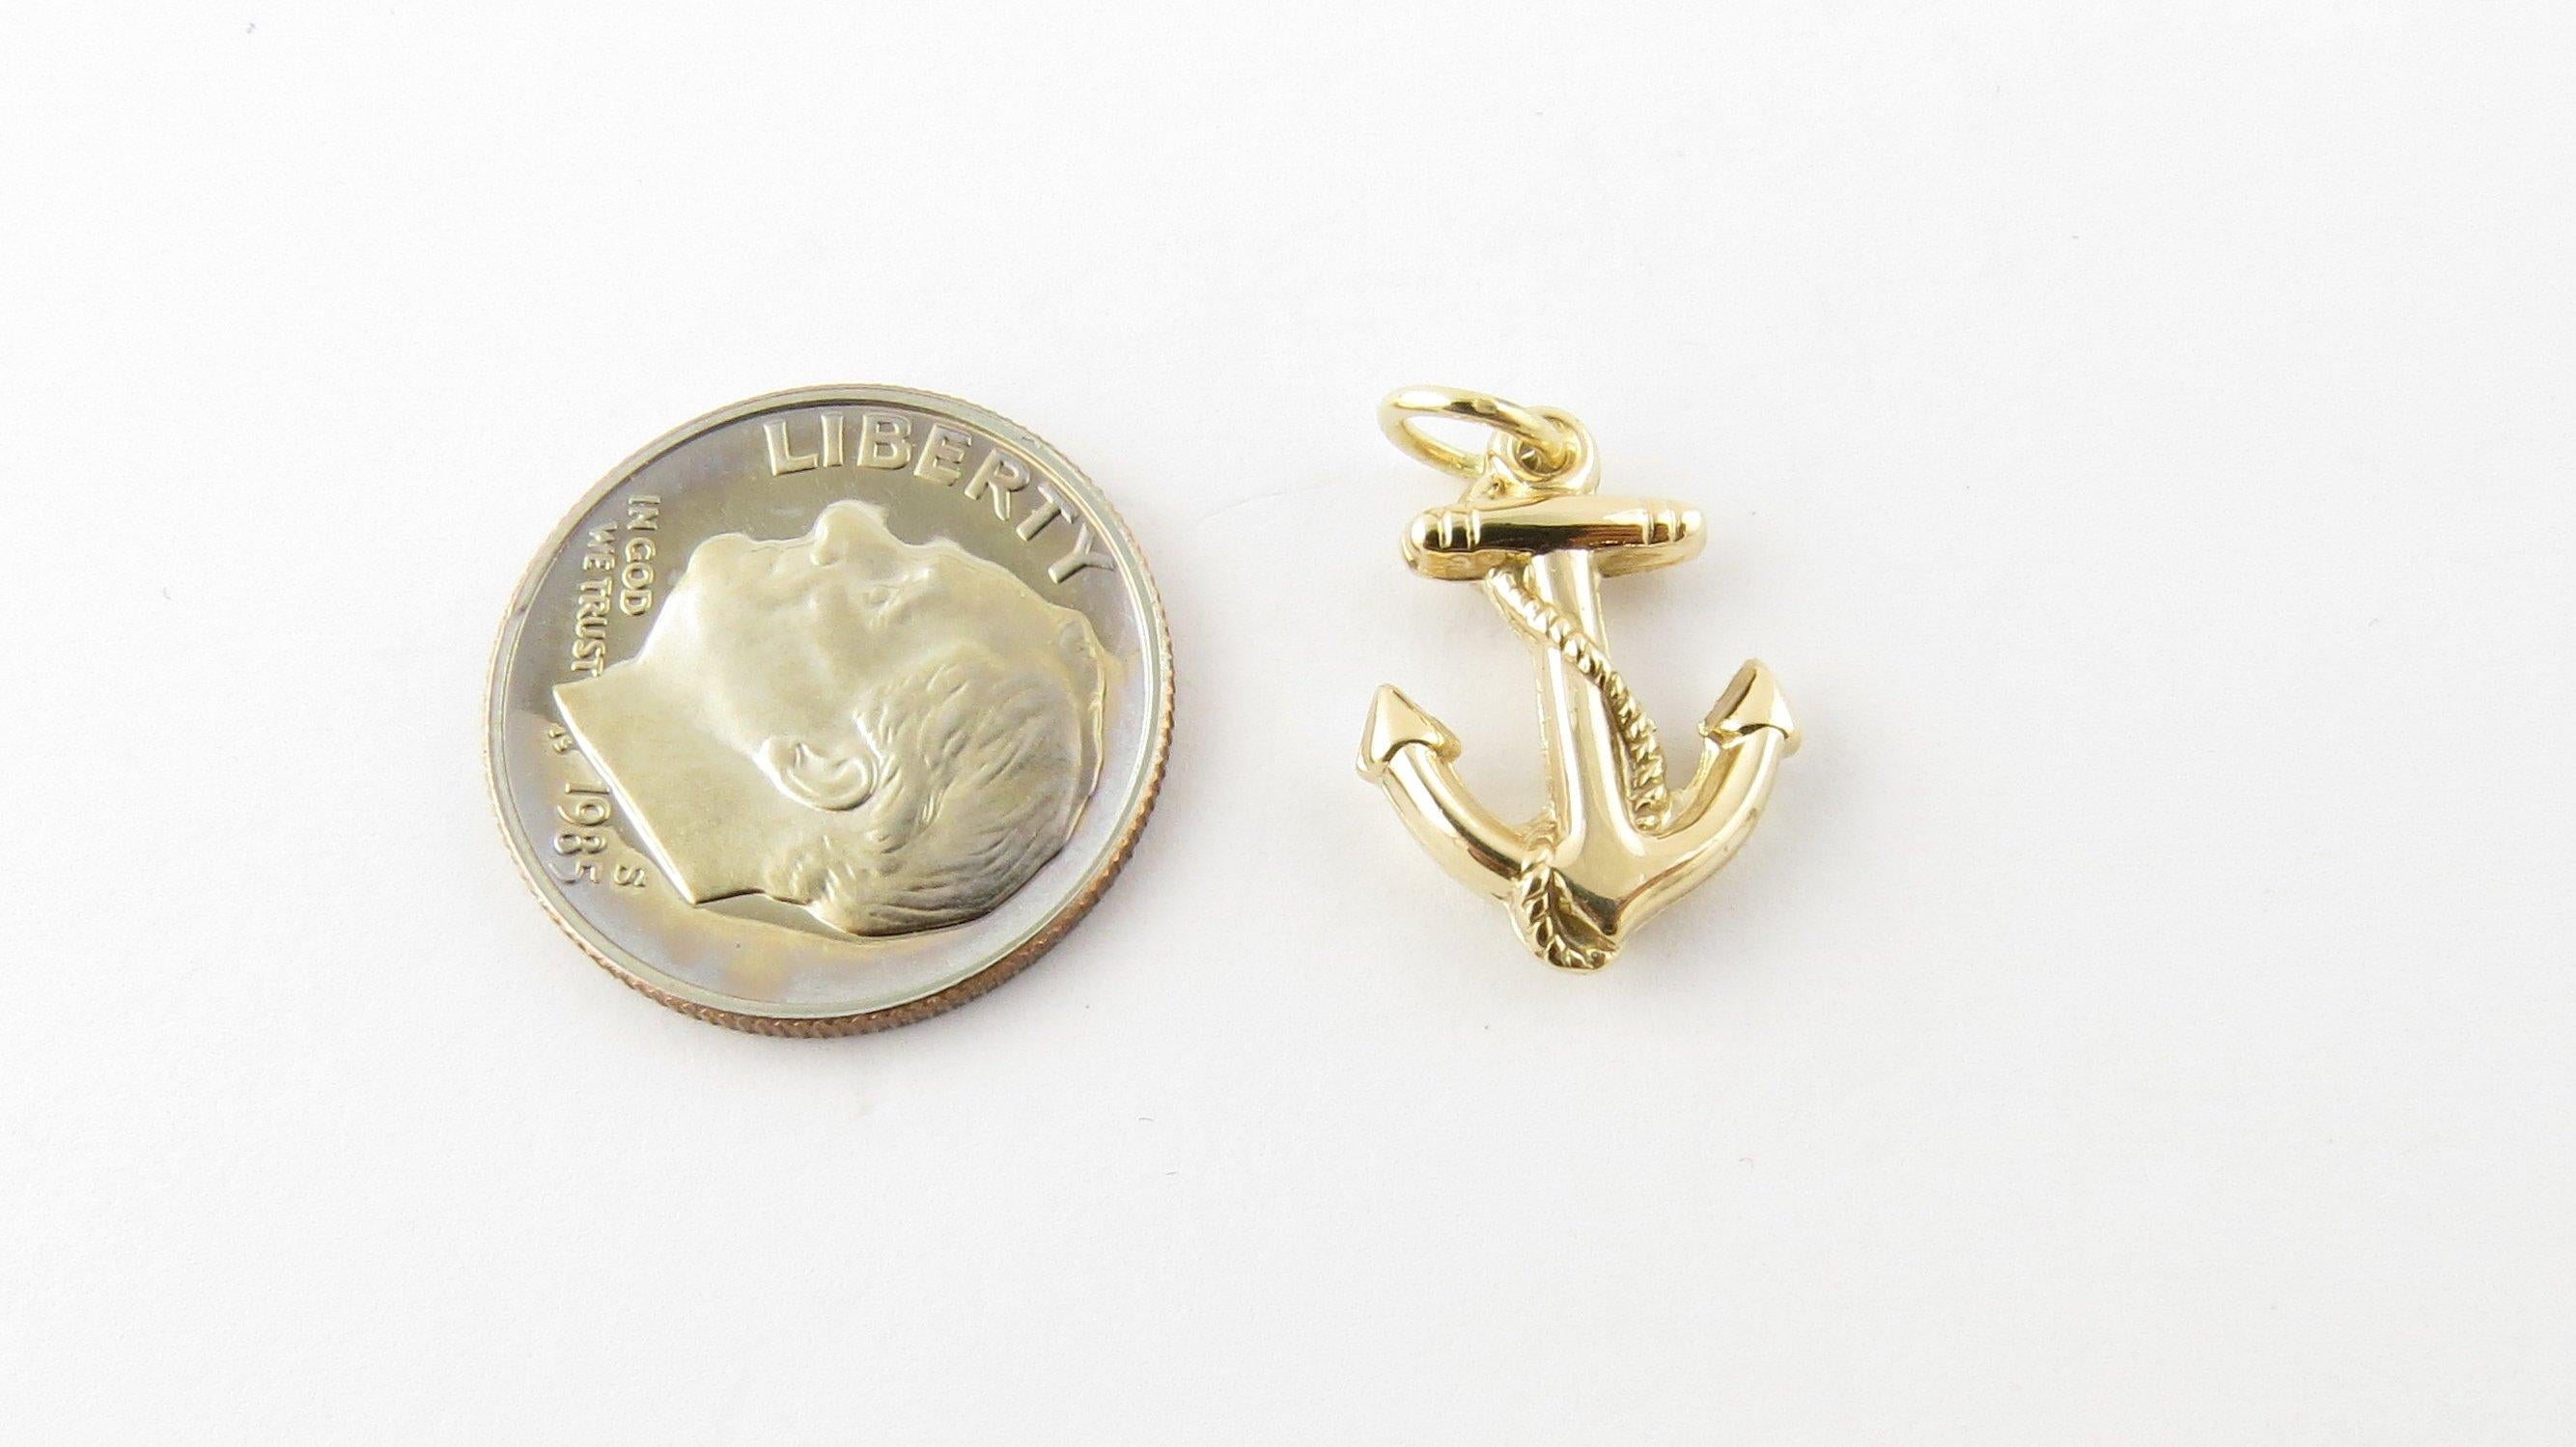 Vintage 14 Karat Yellow Gold Anchor Charm - Anchors Aweigh! This lovely nautical charm features a miniature anchor with rope beautifully detailed in 14K yellow gold.
Size: 16 mm x 12 mm (actual charm) Weight: 0.5 dwt. / 0.8 gr. Stamped: 14K